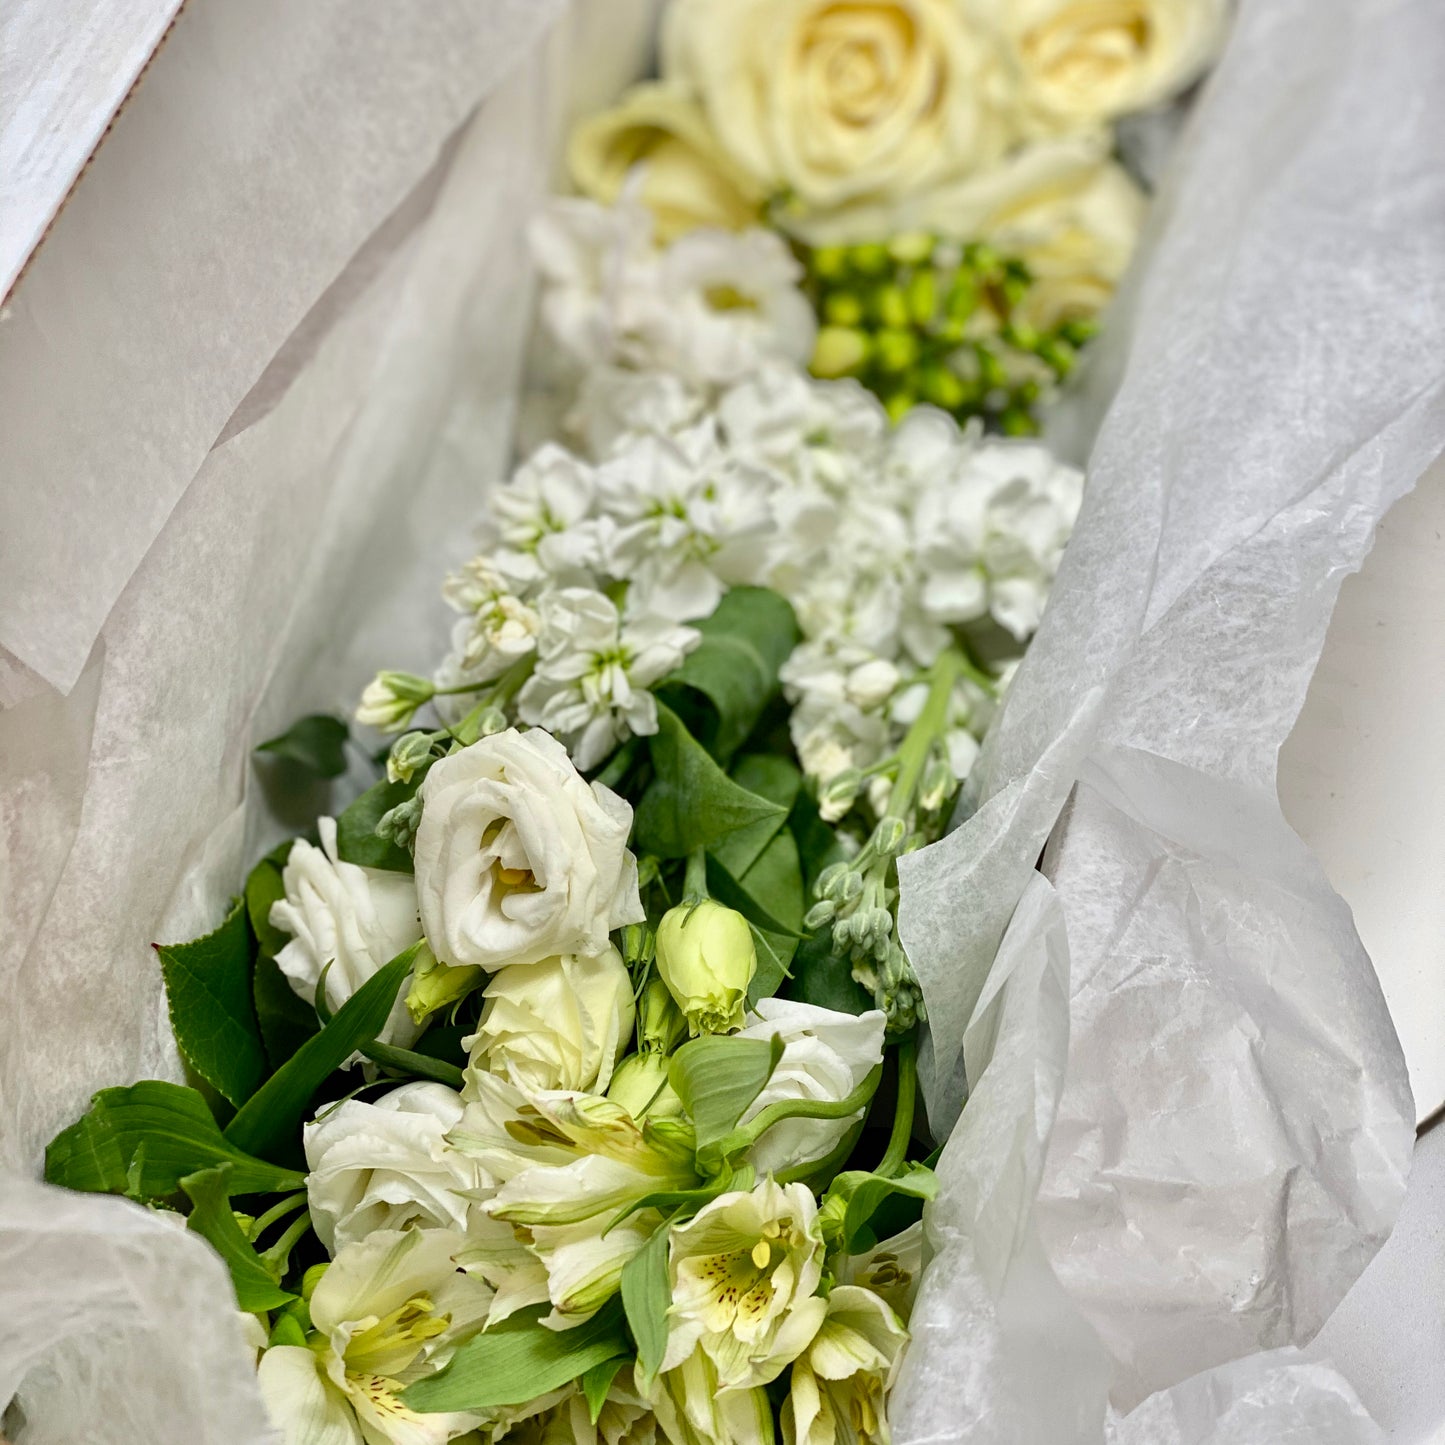 DIY Flower box with white and cream flowers and greens